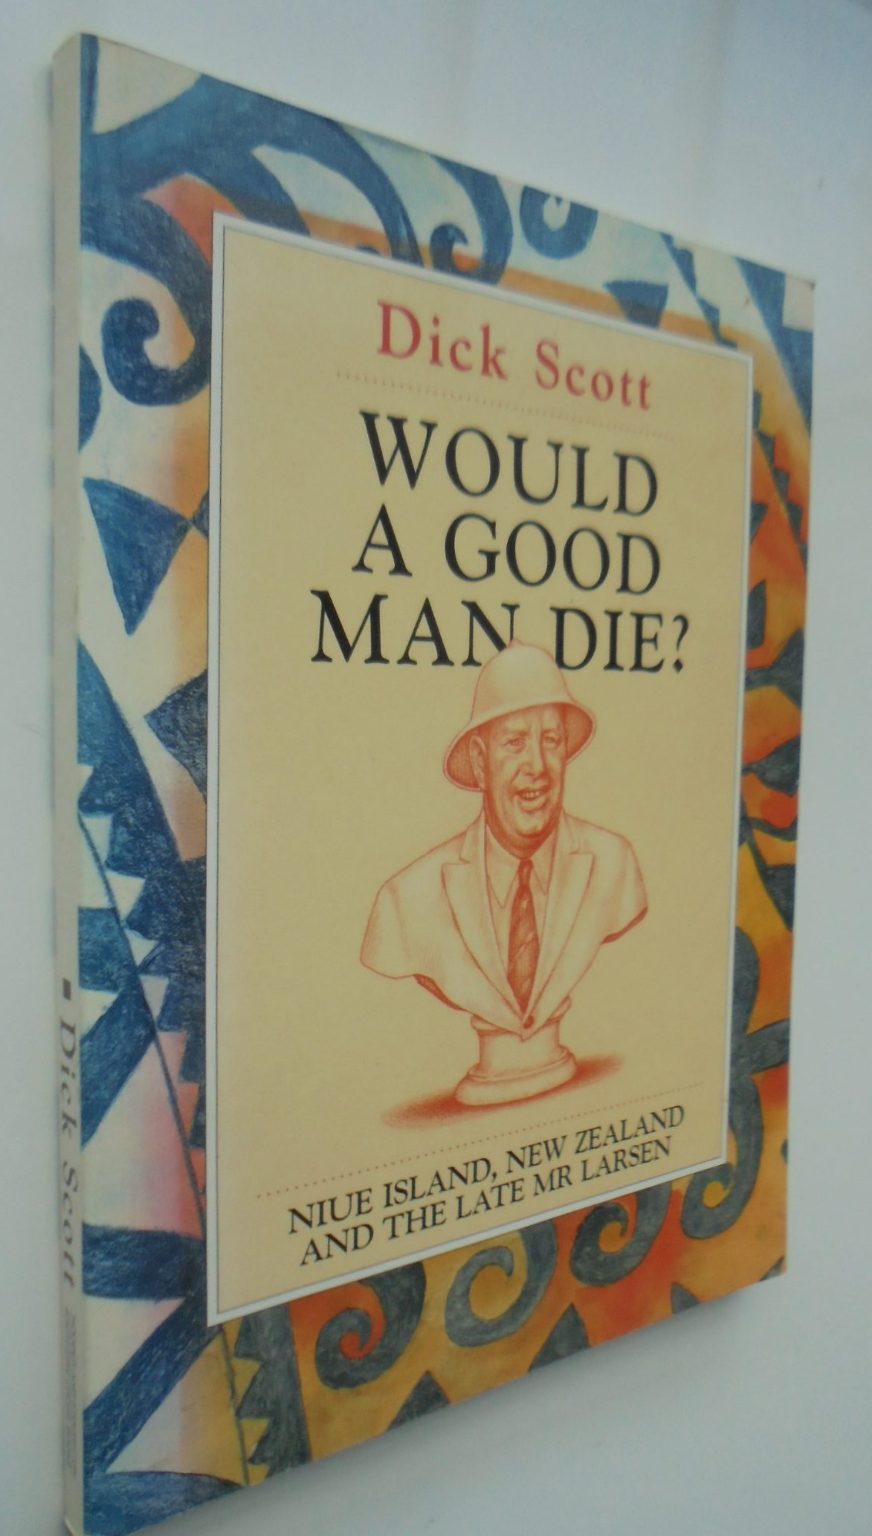 Would a Good Man Die? Niue Island, New Zealand and the late Mr. Larsen By Dick Scott.